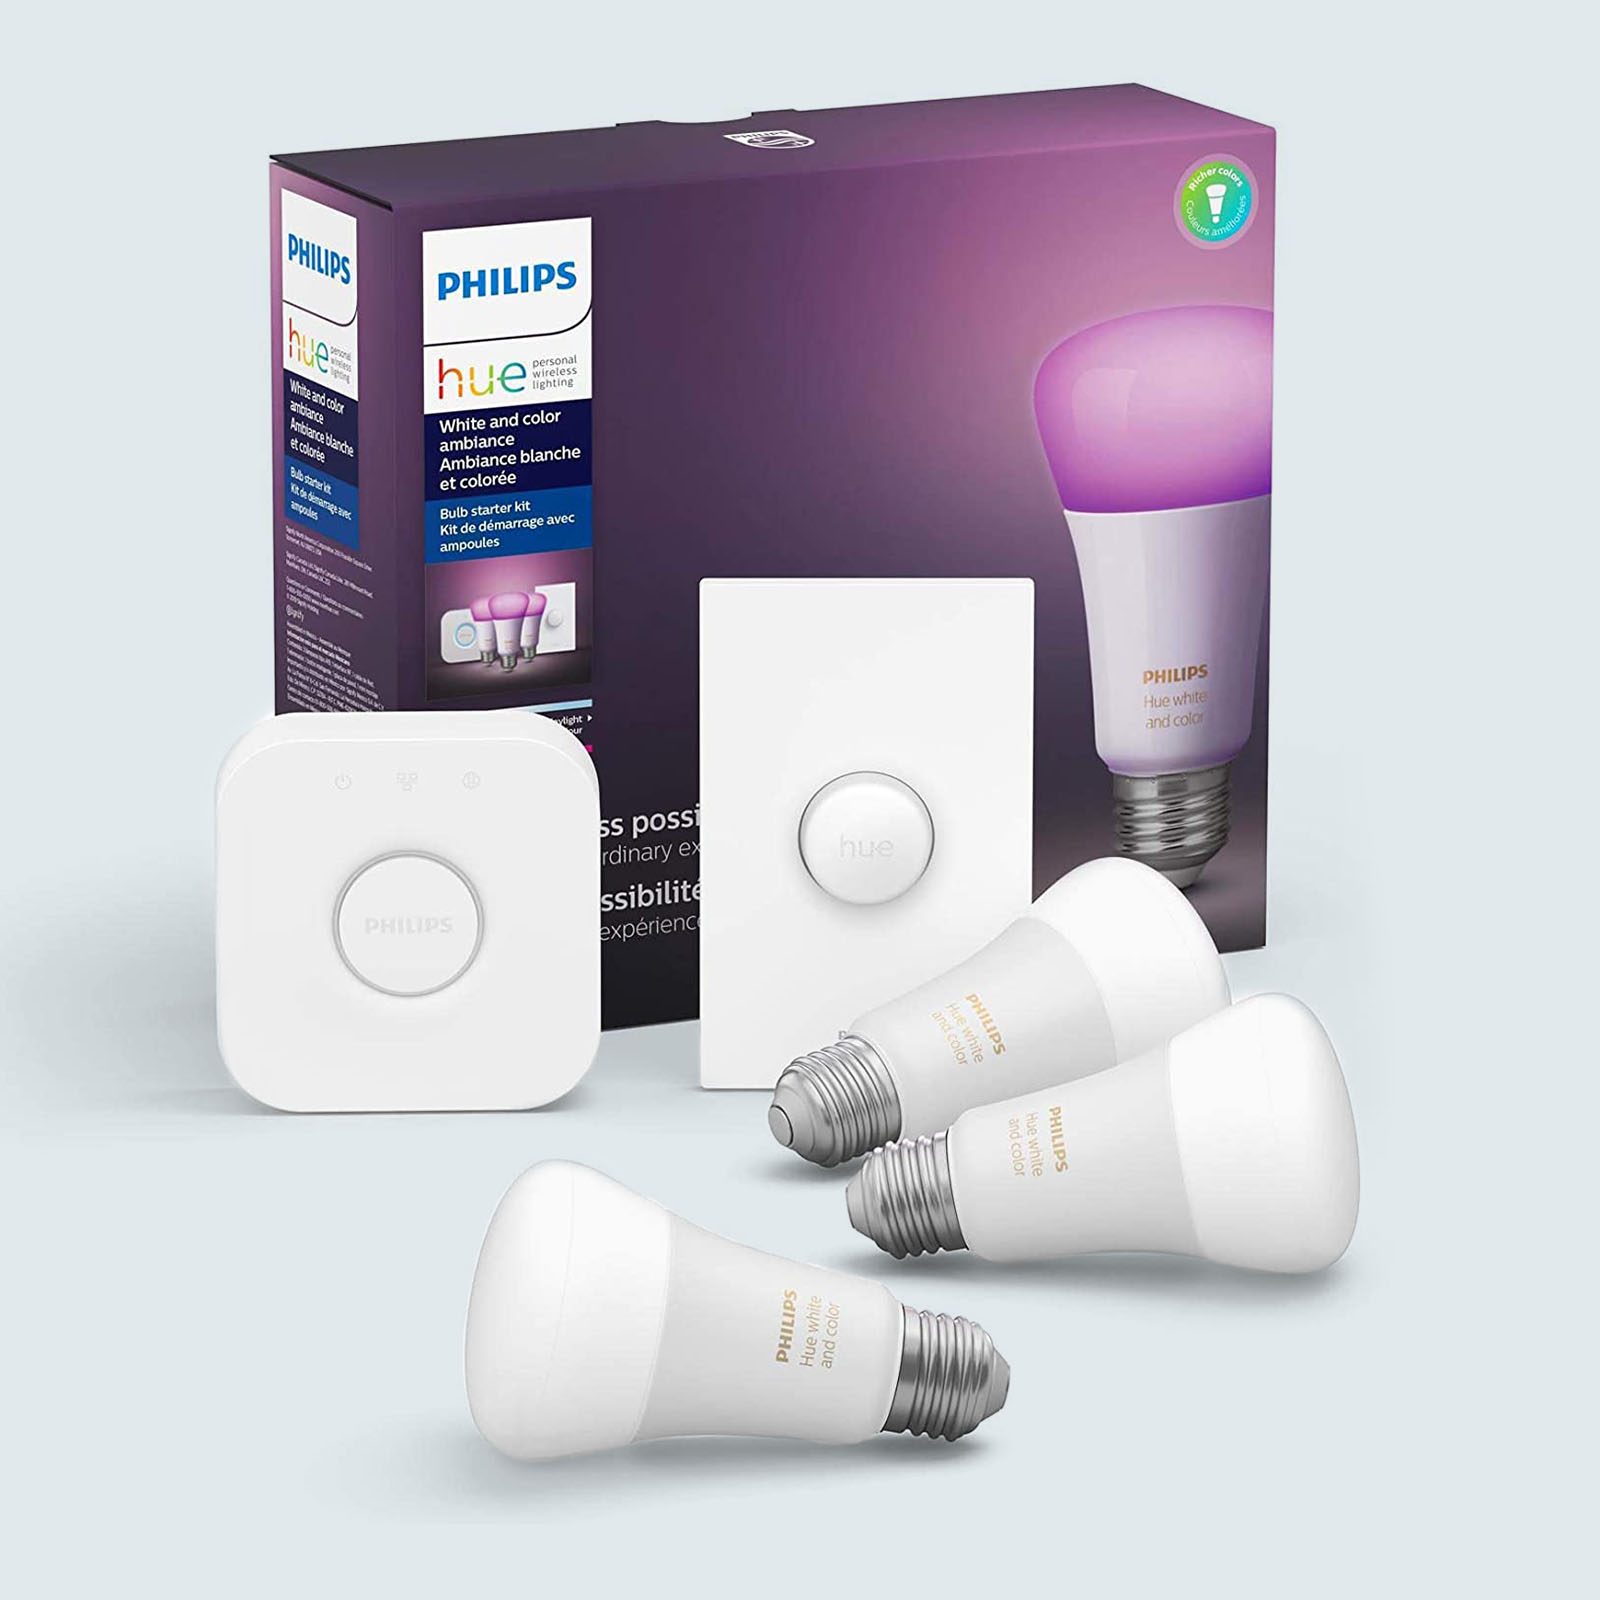 Philips Hue System